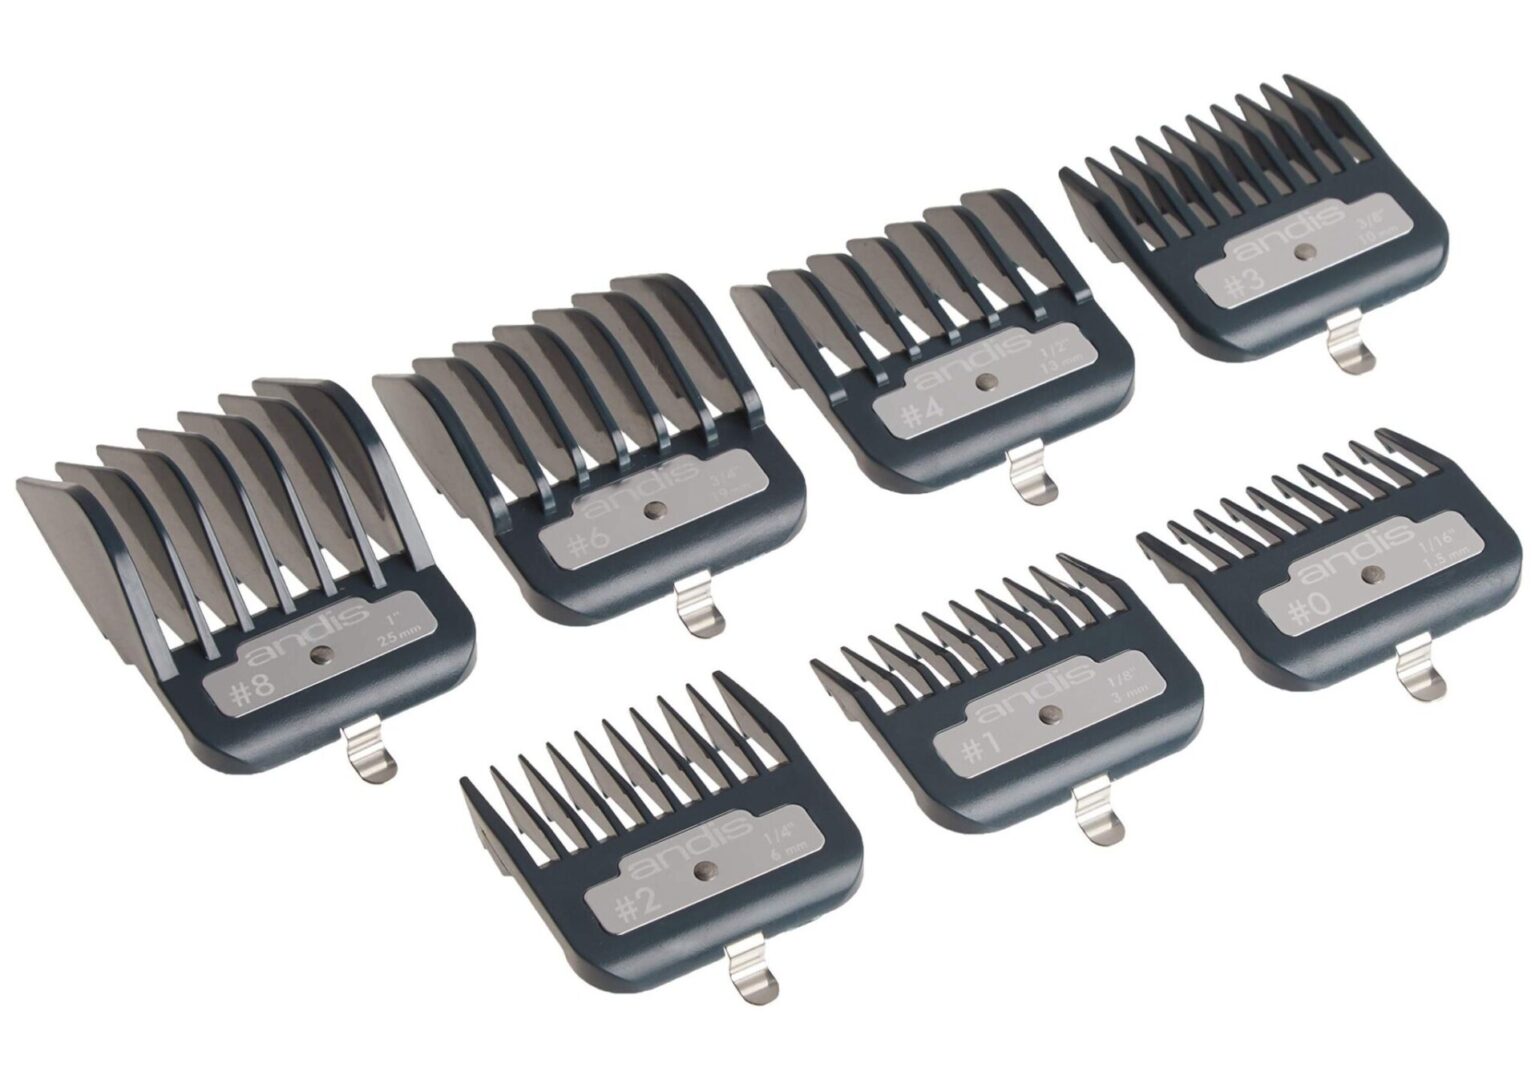 A set of eight different sizes of hair clippers.